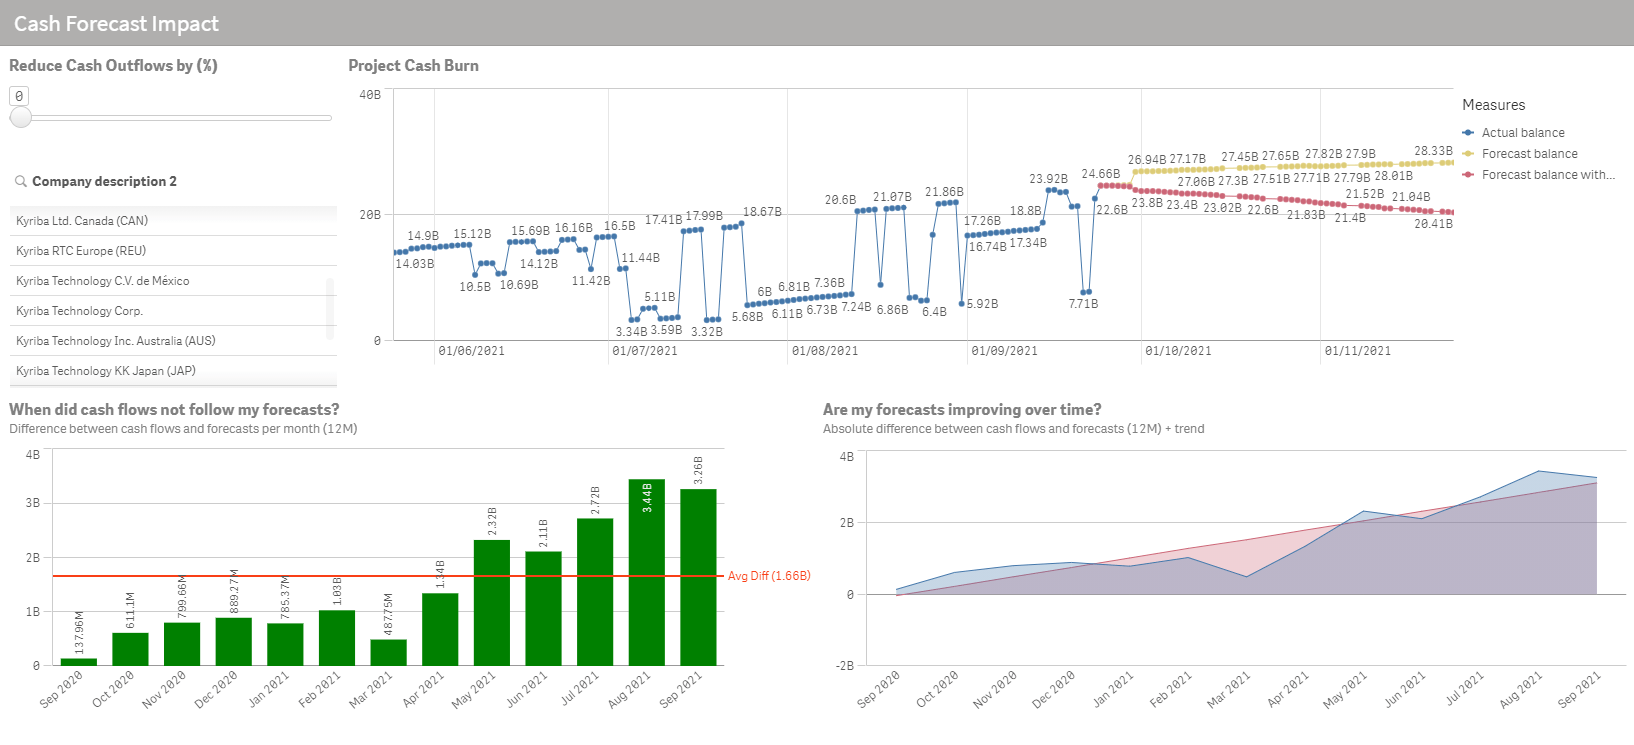 Cash flow analytics for cash flow forecasting - an example of cash flow dashboard